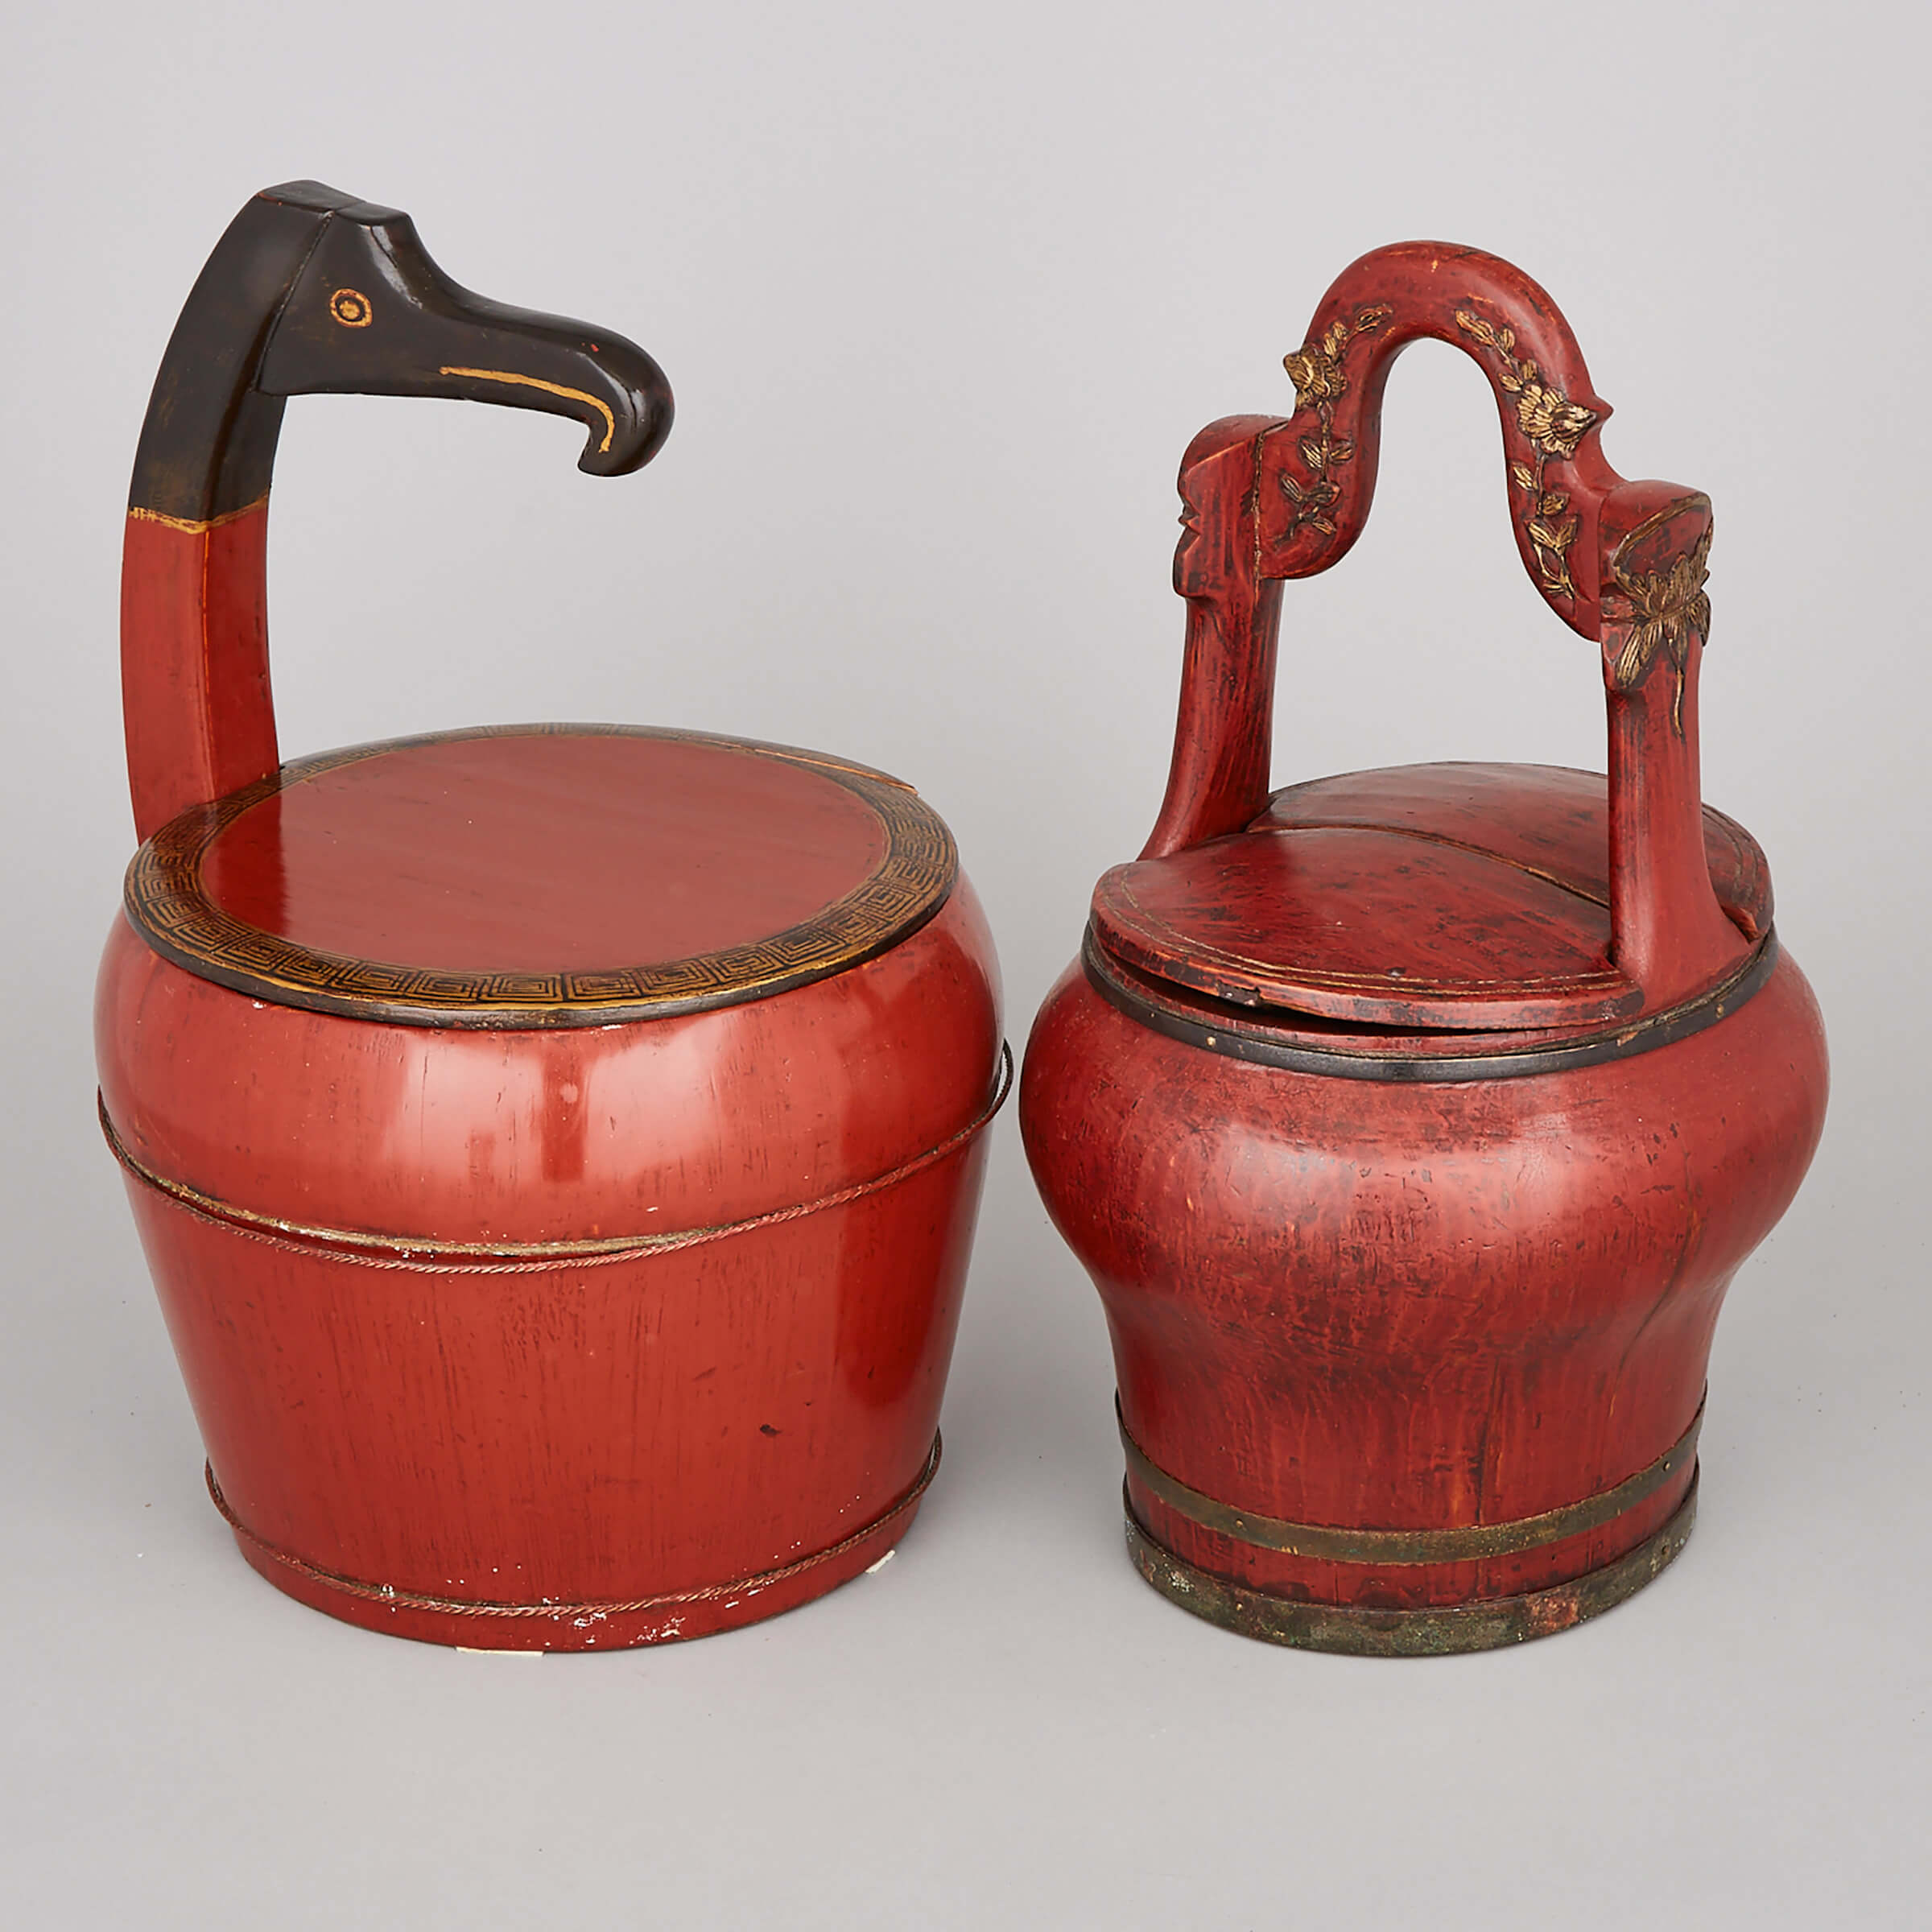 Two Chinese Red Lacquer Pails, 19th Century